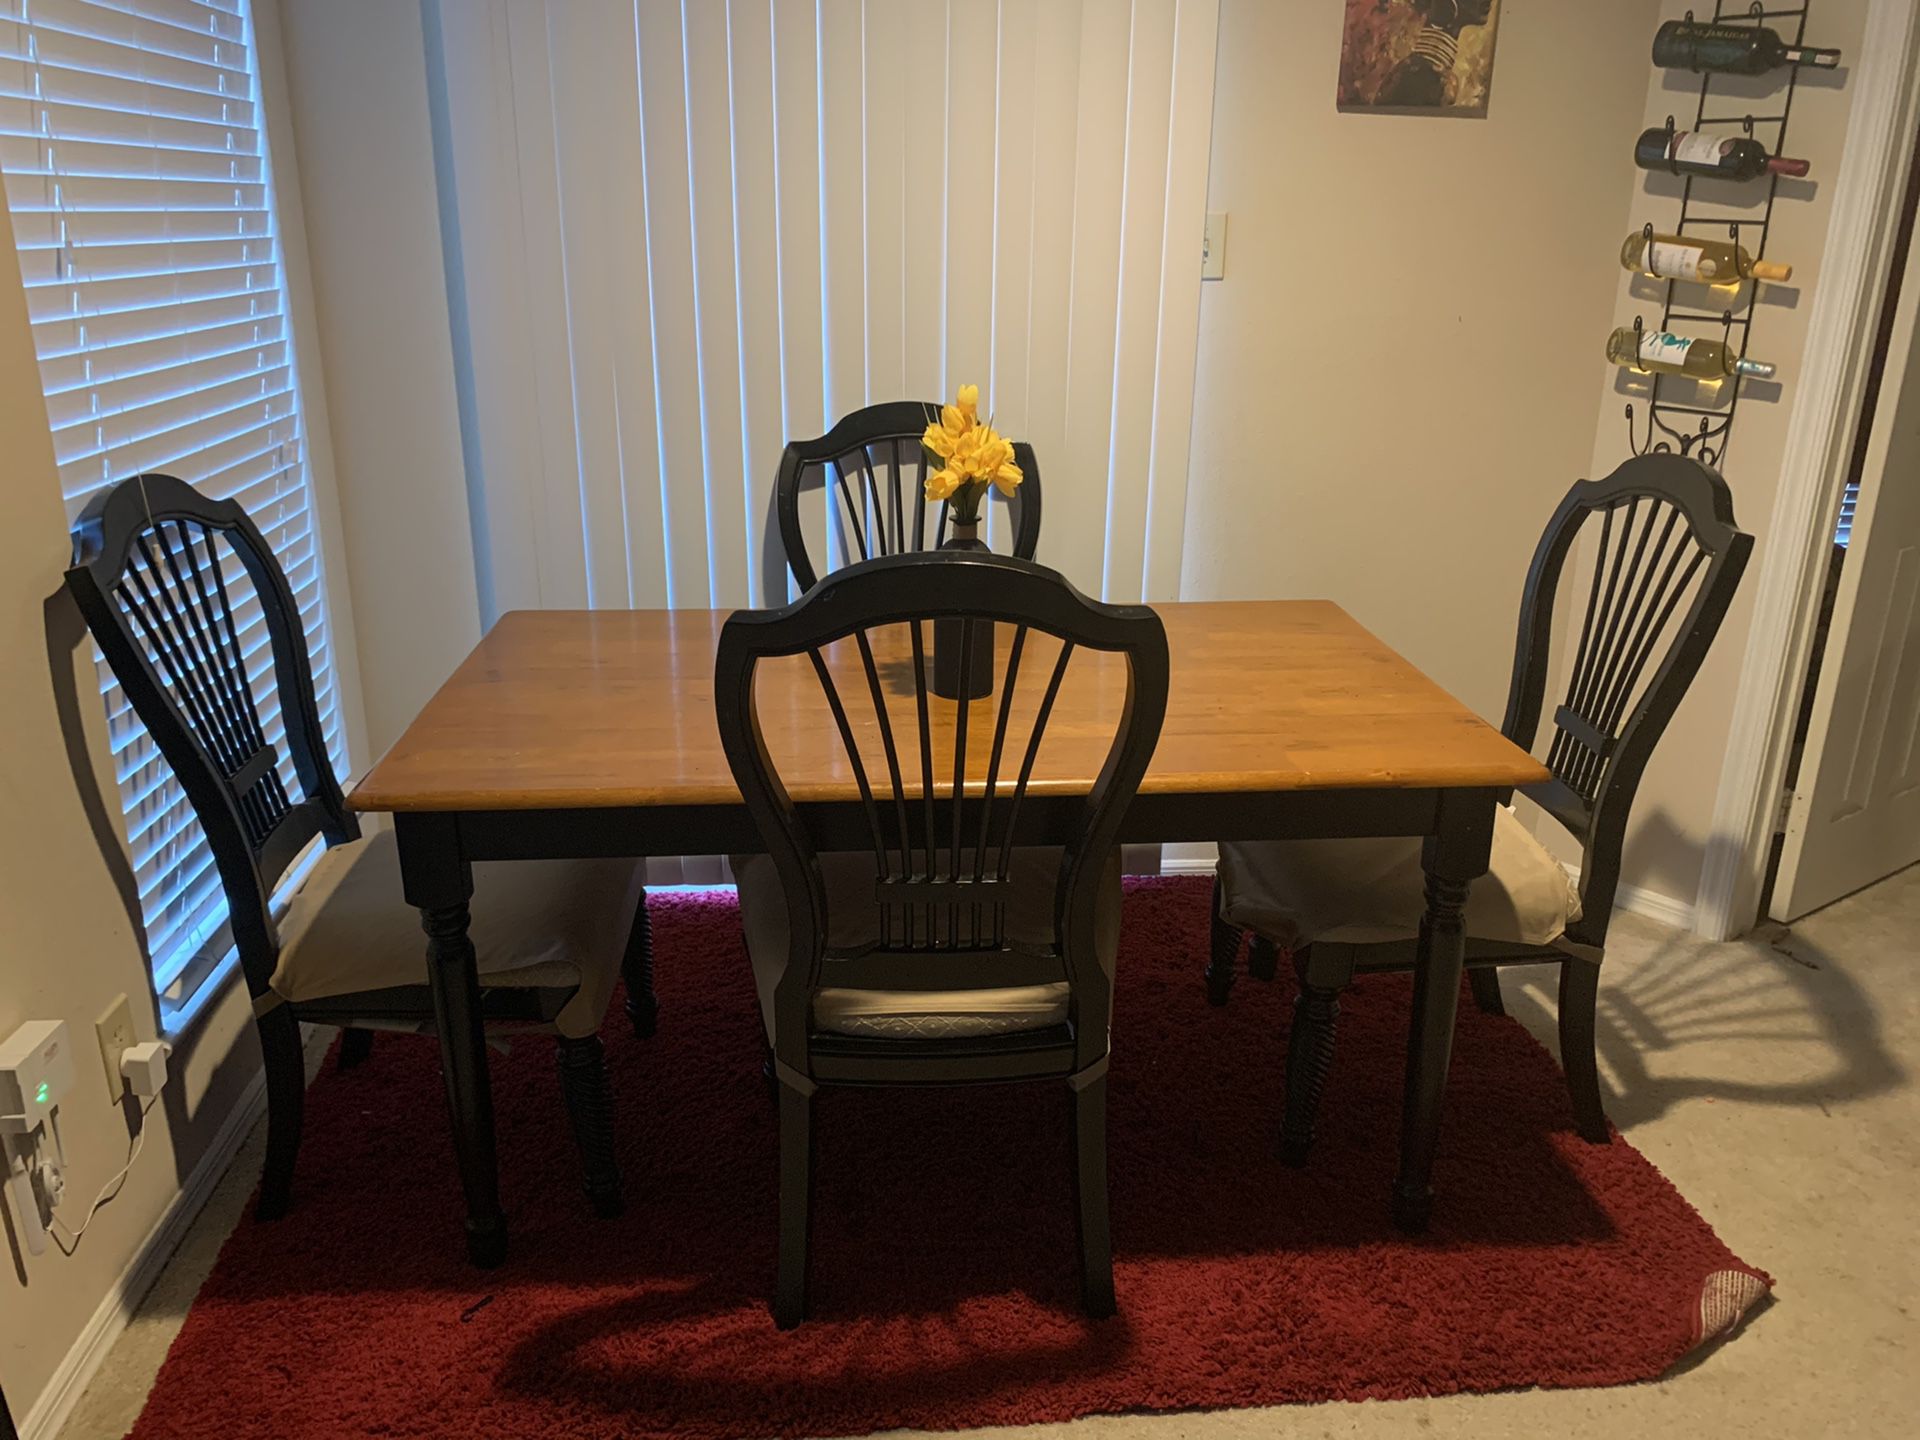 Better Homes & Gardens Autumn Lane Farmhouse Dining Table w/ 4 chairs